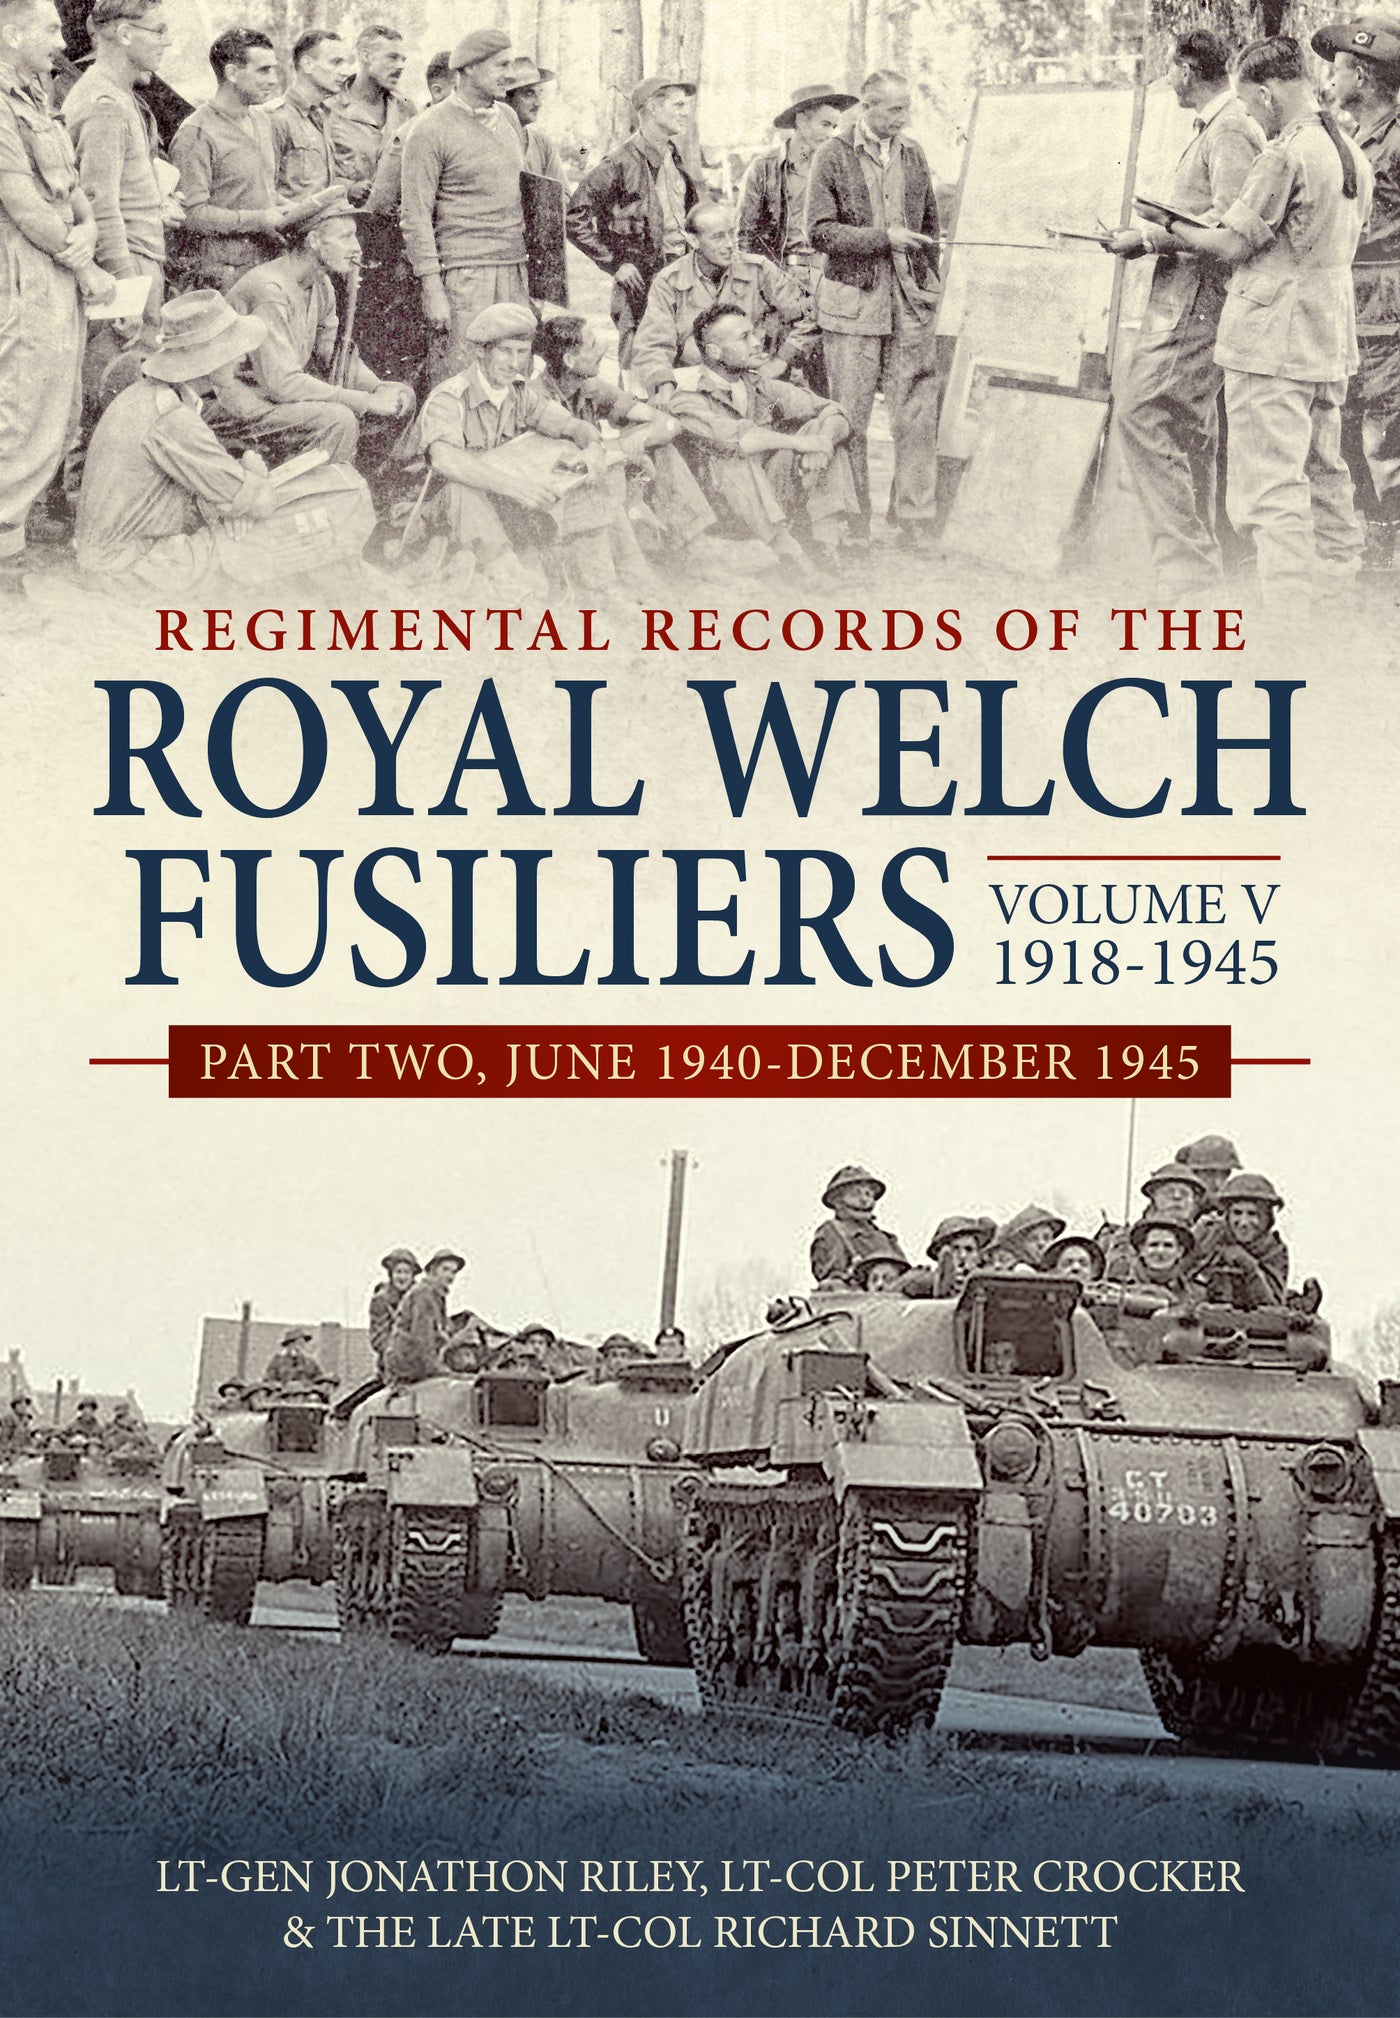 Regimental Records of the Royal Welch Fusiliers Volume V, 1918-1945. Part 2